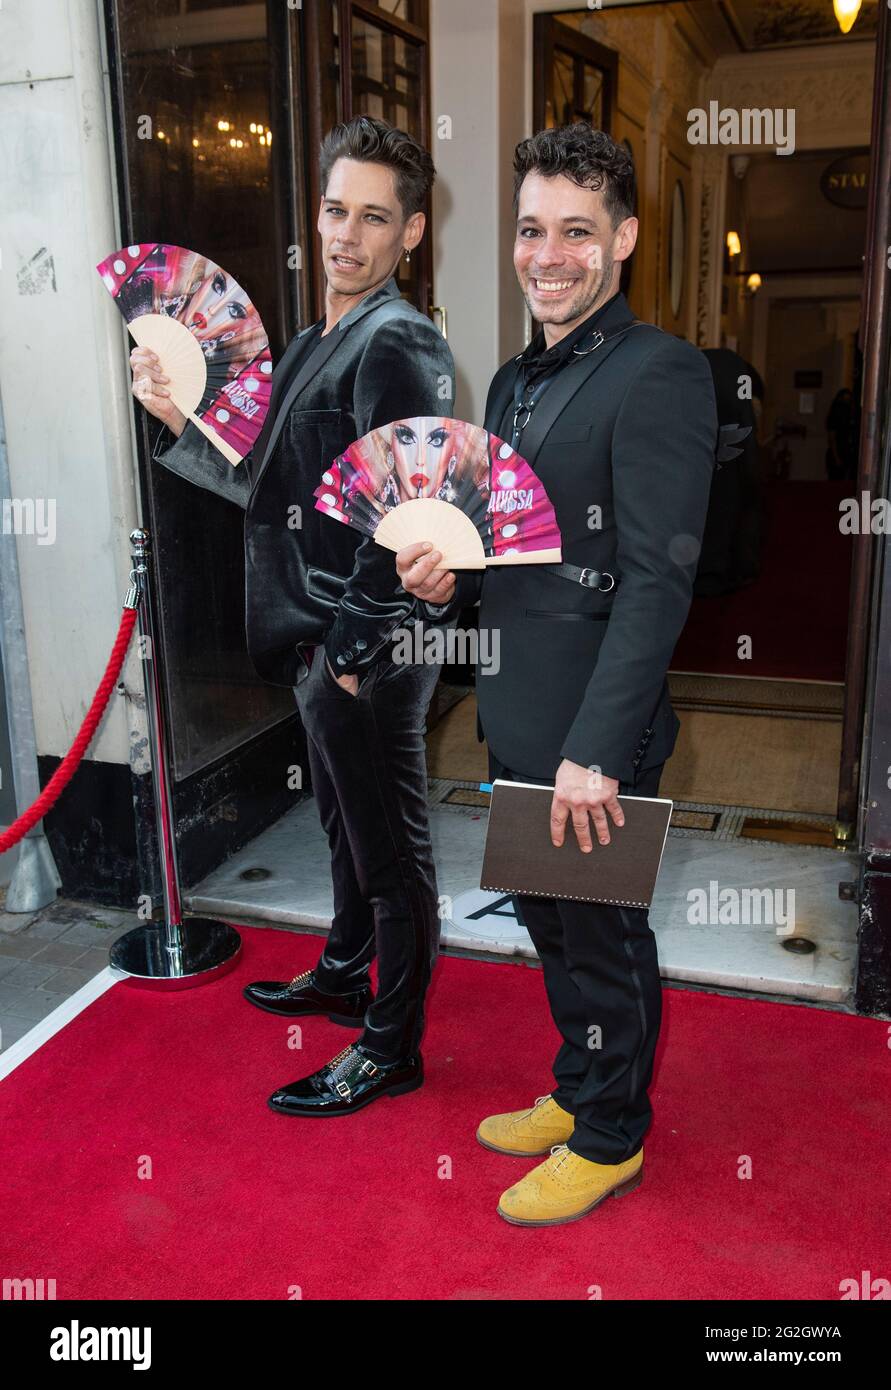 London, UK. 28th May, 2021. Louis and Spencer Noll attend the “Alyssa Memoirs of a Queen” Gala night at the Vaudeville Theatre, The Strand in London. Credit: SOPA Images Limited/Alamy Live News Stock Photo